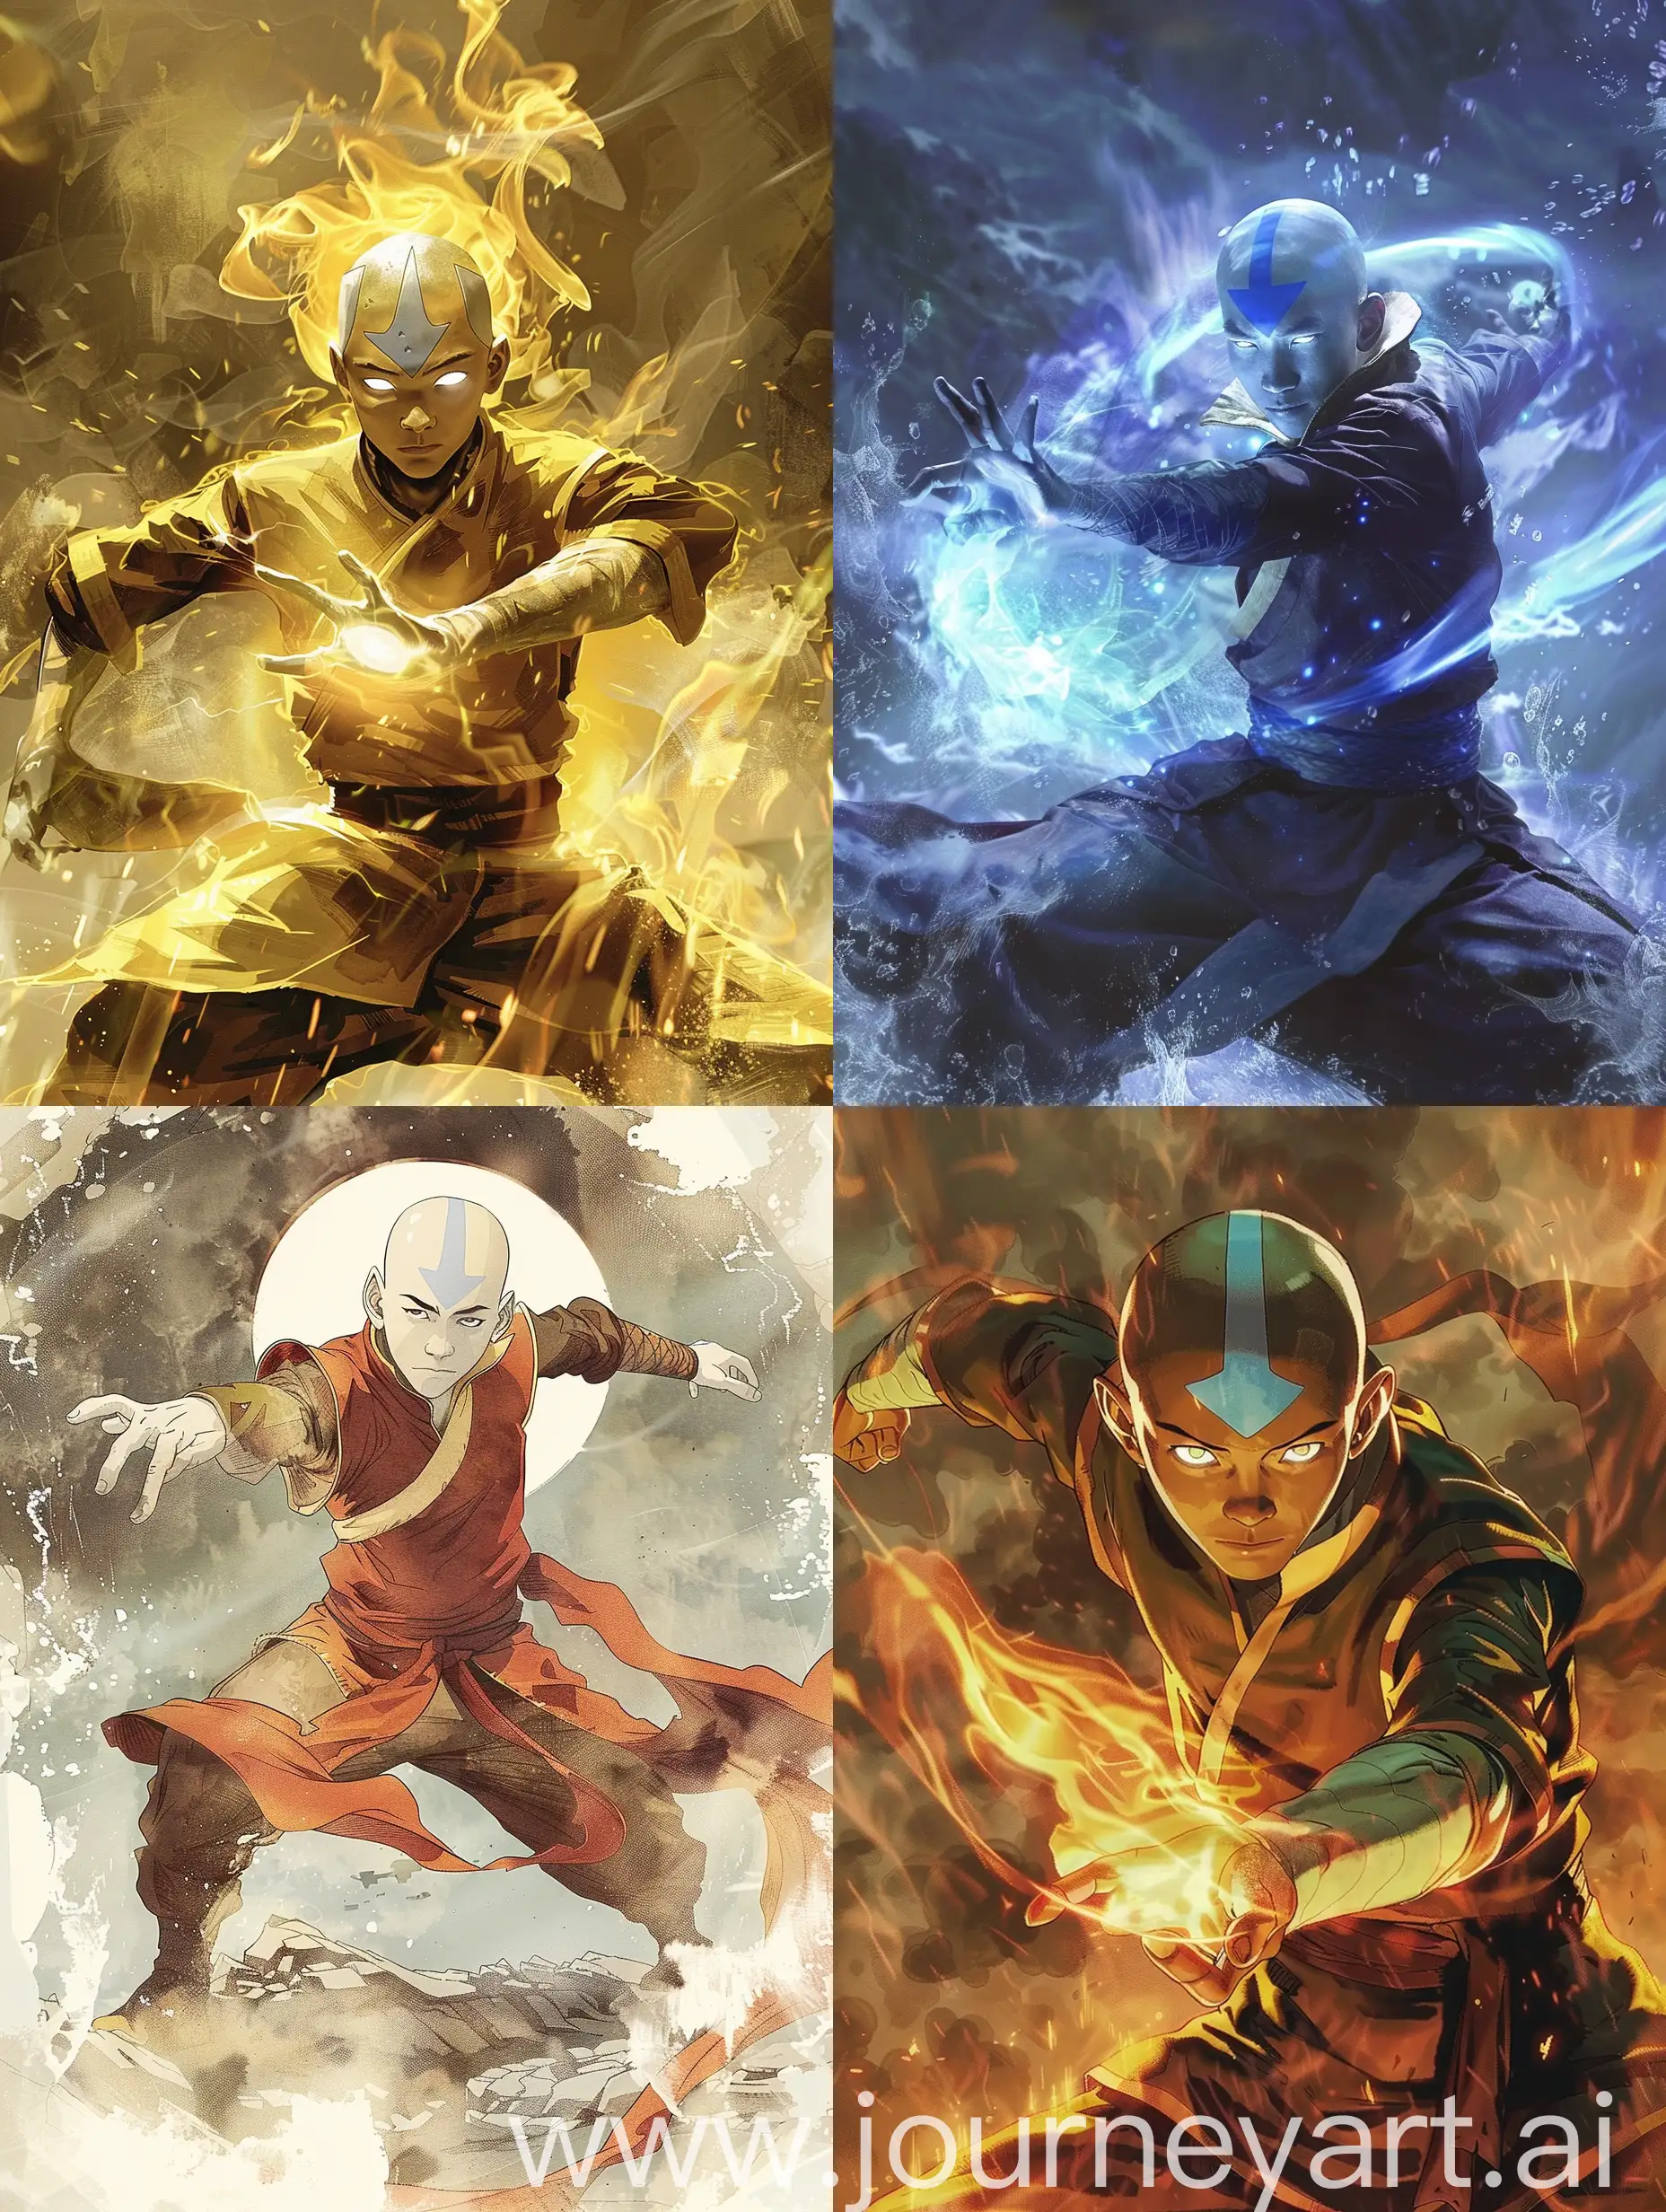 Epic-Avatar-The-Last-Airbender-Art-Volume-6-Cover-with-34-Aspect-Ratio